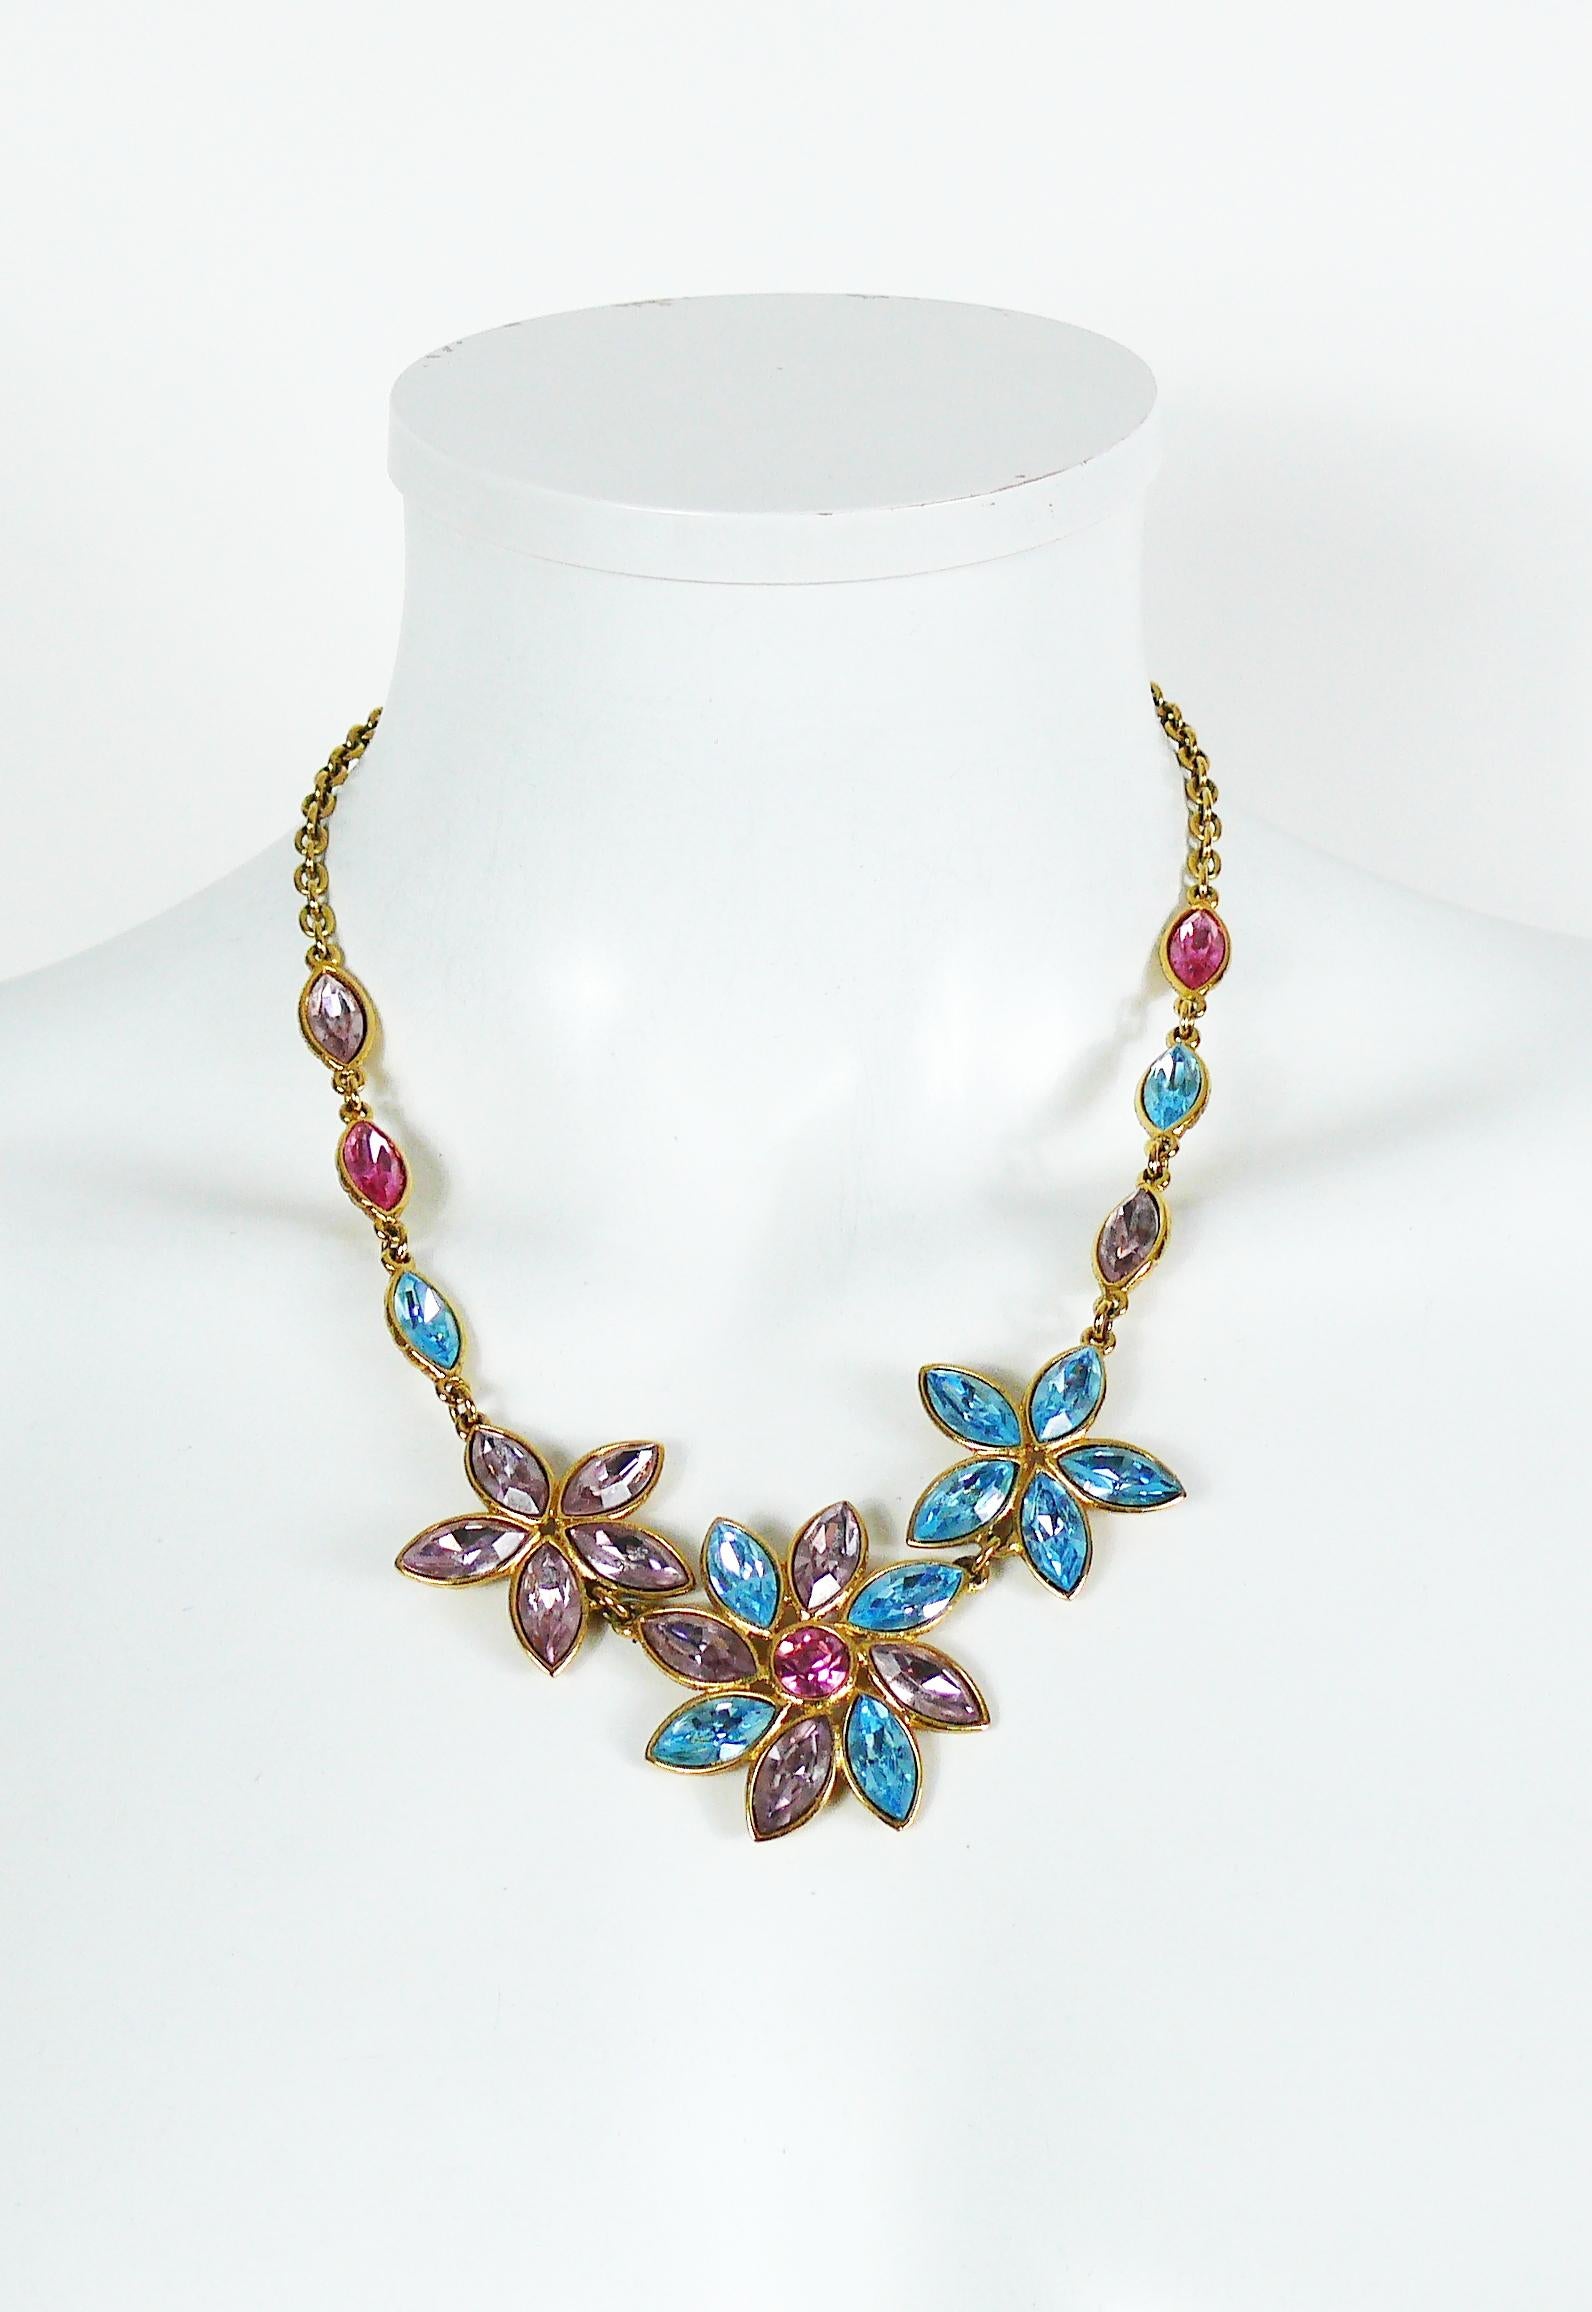 YVES SAINT LAURENT vintage gold toned necklace featuring flowers with multicolored crystal embellishement.

T-bar closure.

Love clasp rings embossed YVES SAINT LAURENT.
Made in France.

Indicative measurements : adjustable length from approx. 45 cm